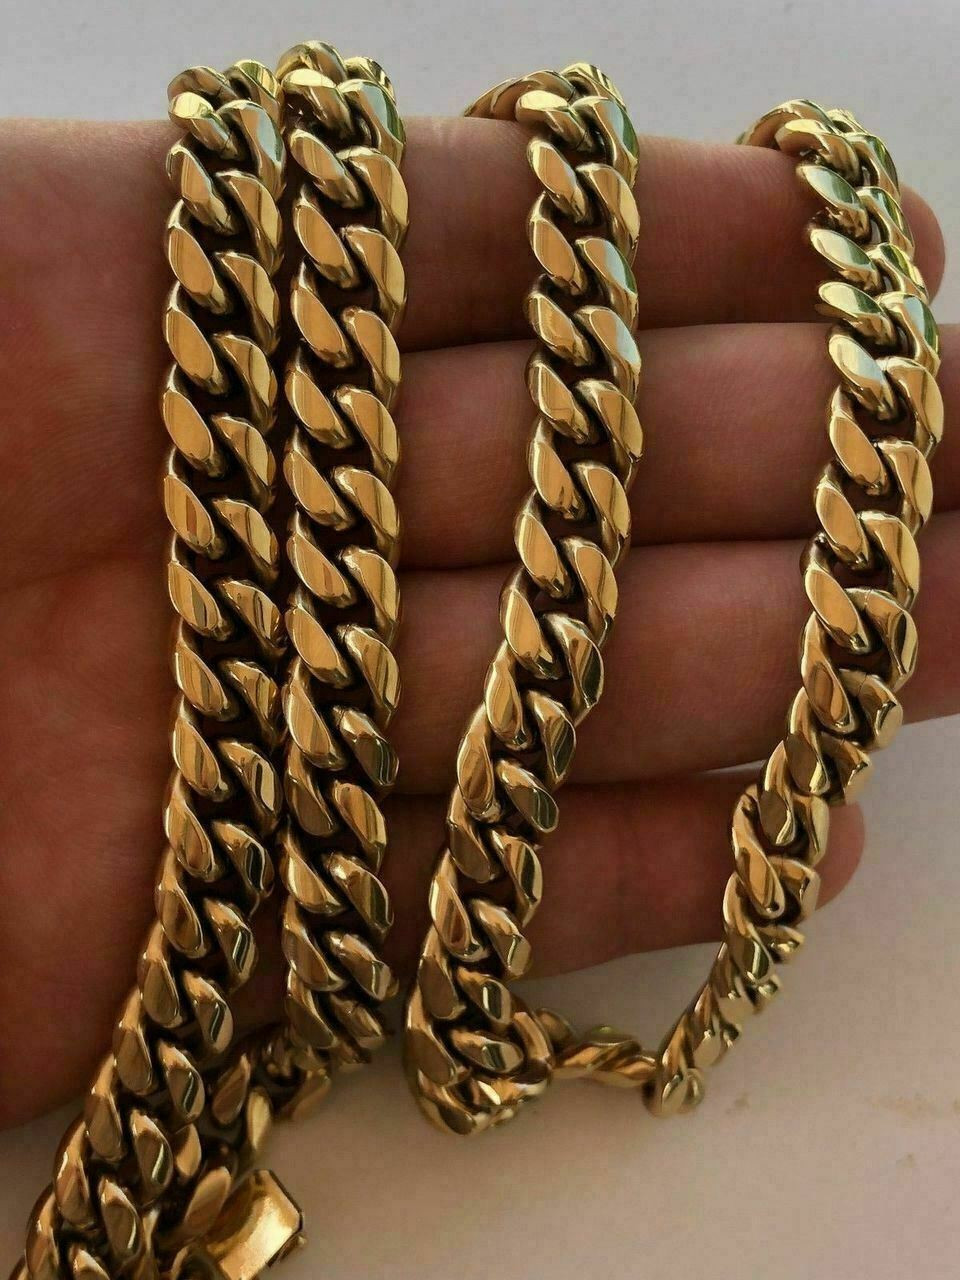 HARLEMBLING 10mm Mens Miami Cuban Link Chain 14k Gold Plated HEAVY 18